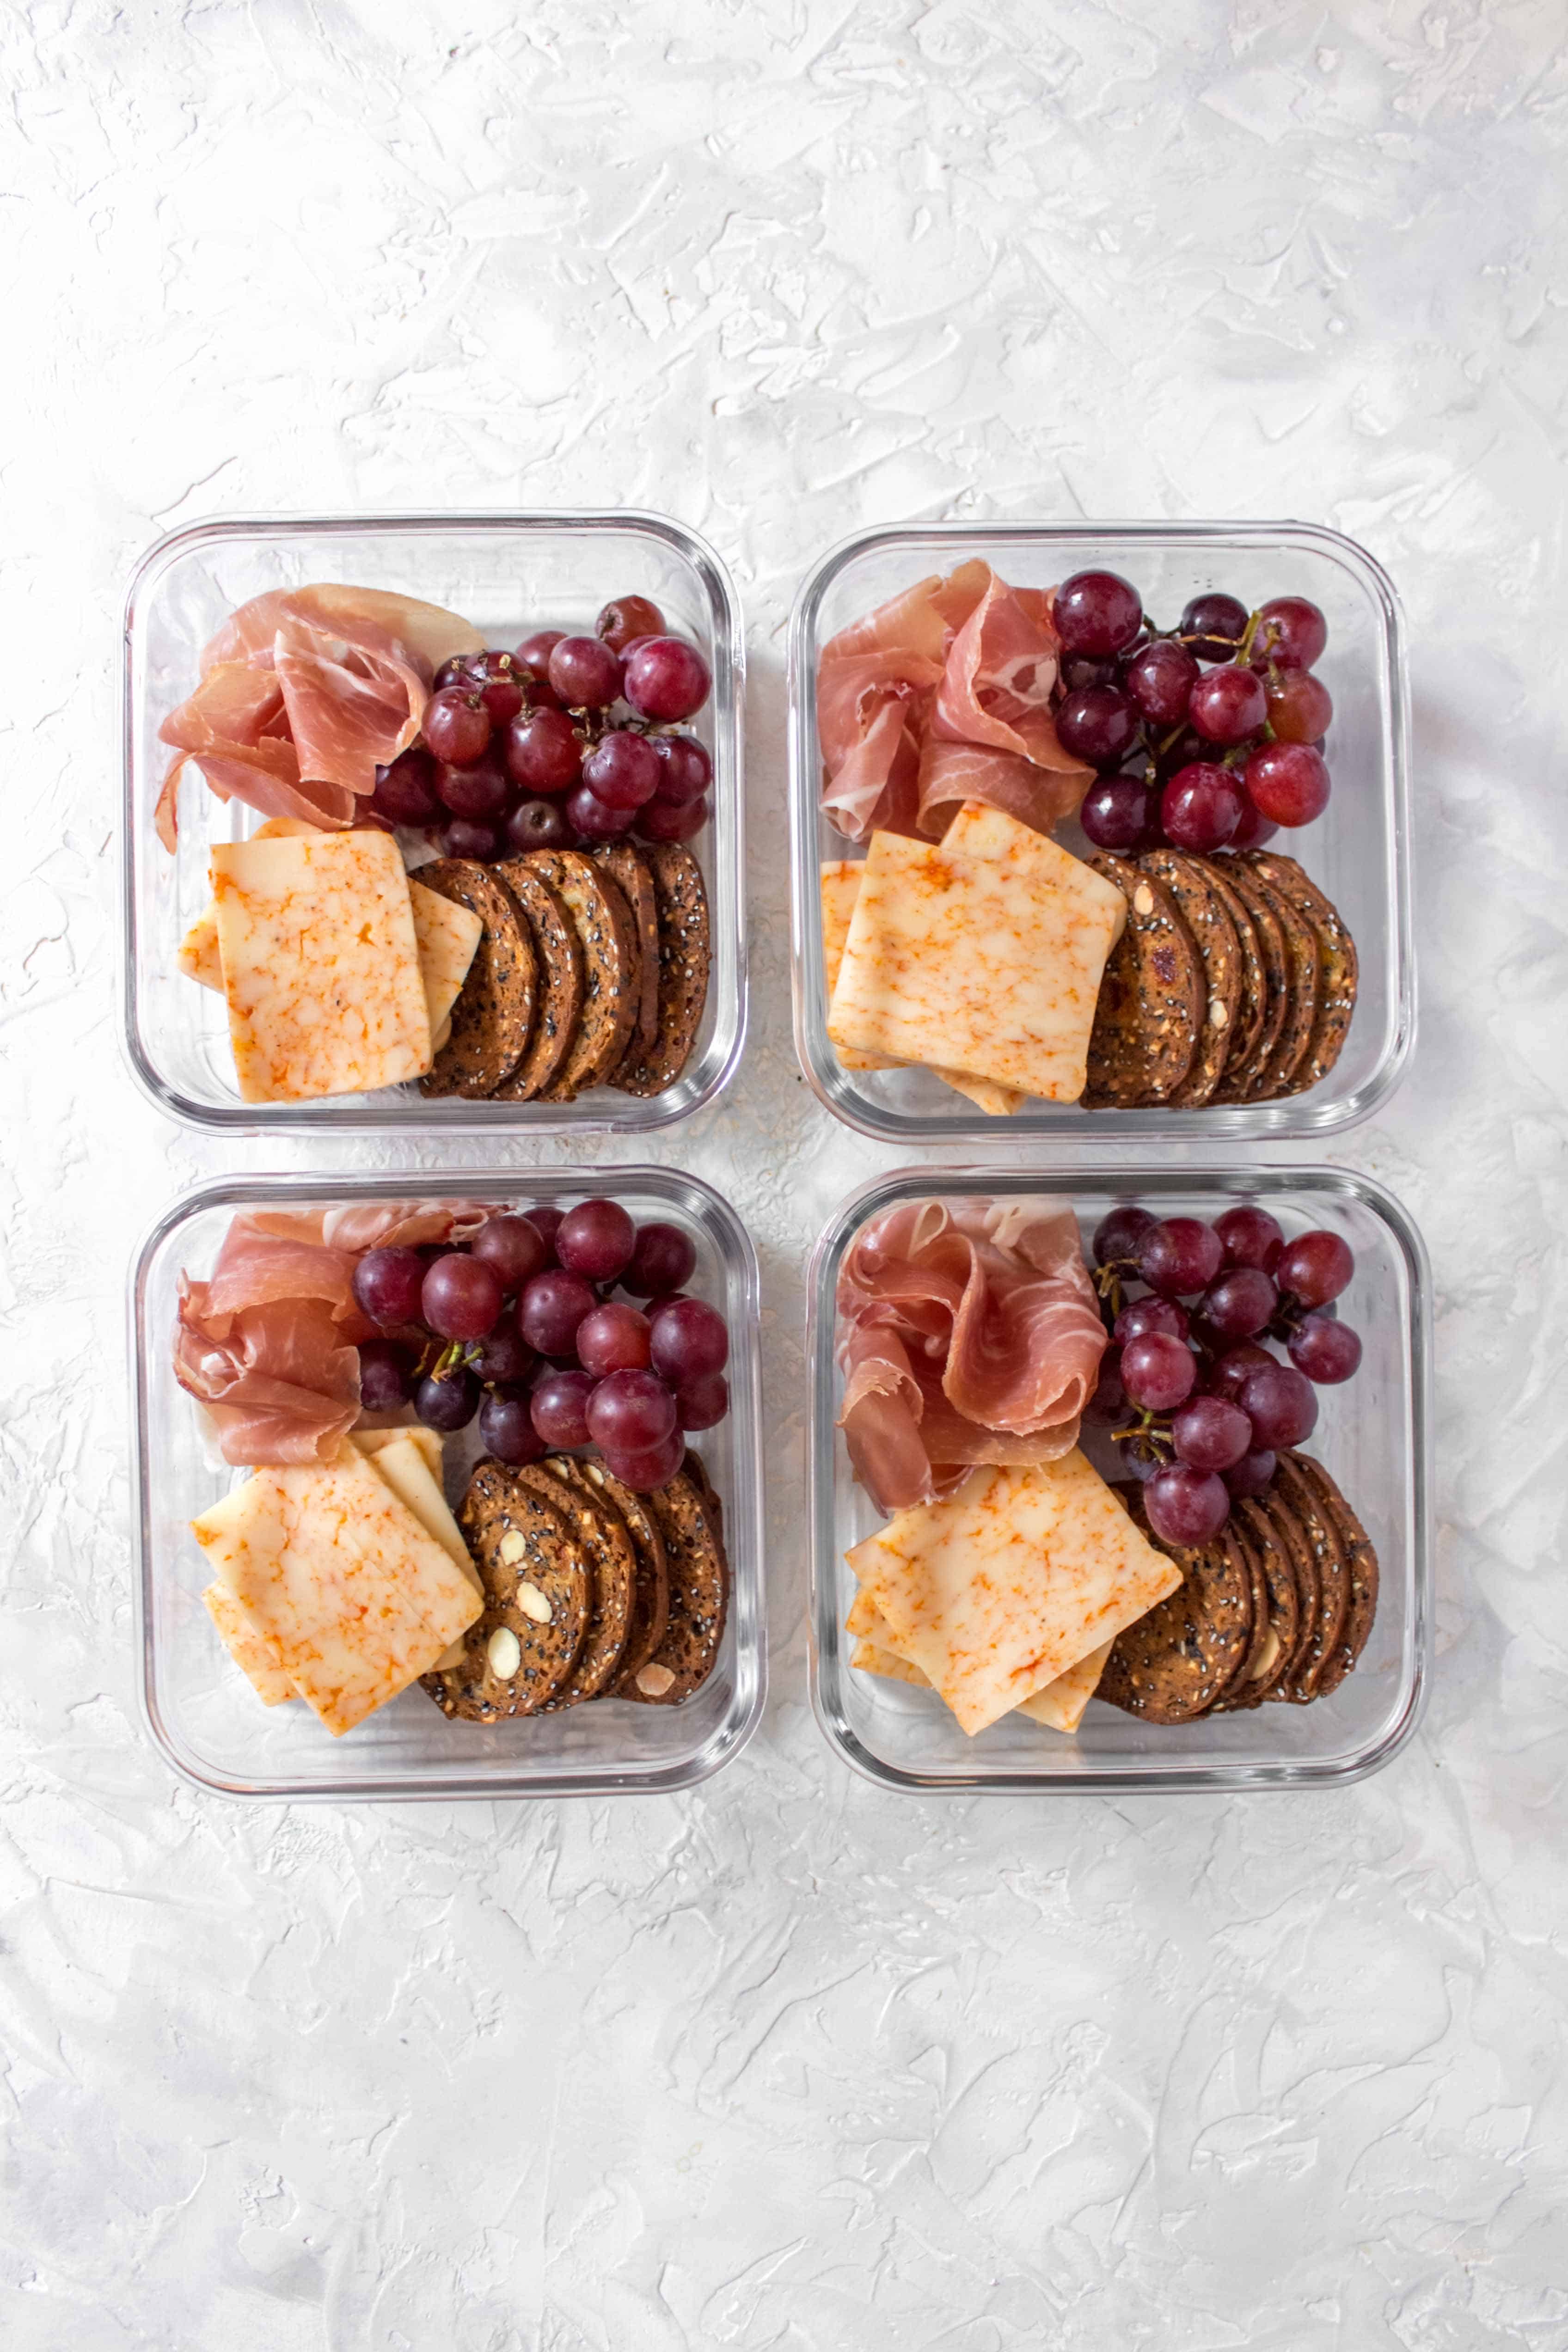 https://carmyy.com/wp-content/uploads/2019/11/adult-lunchables-3.jpg